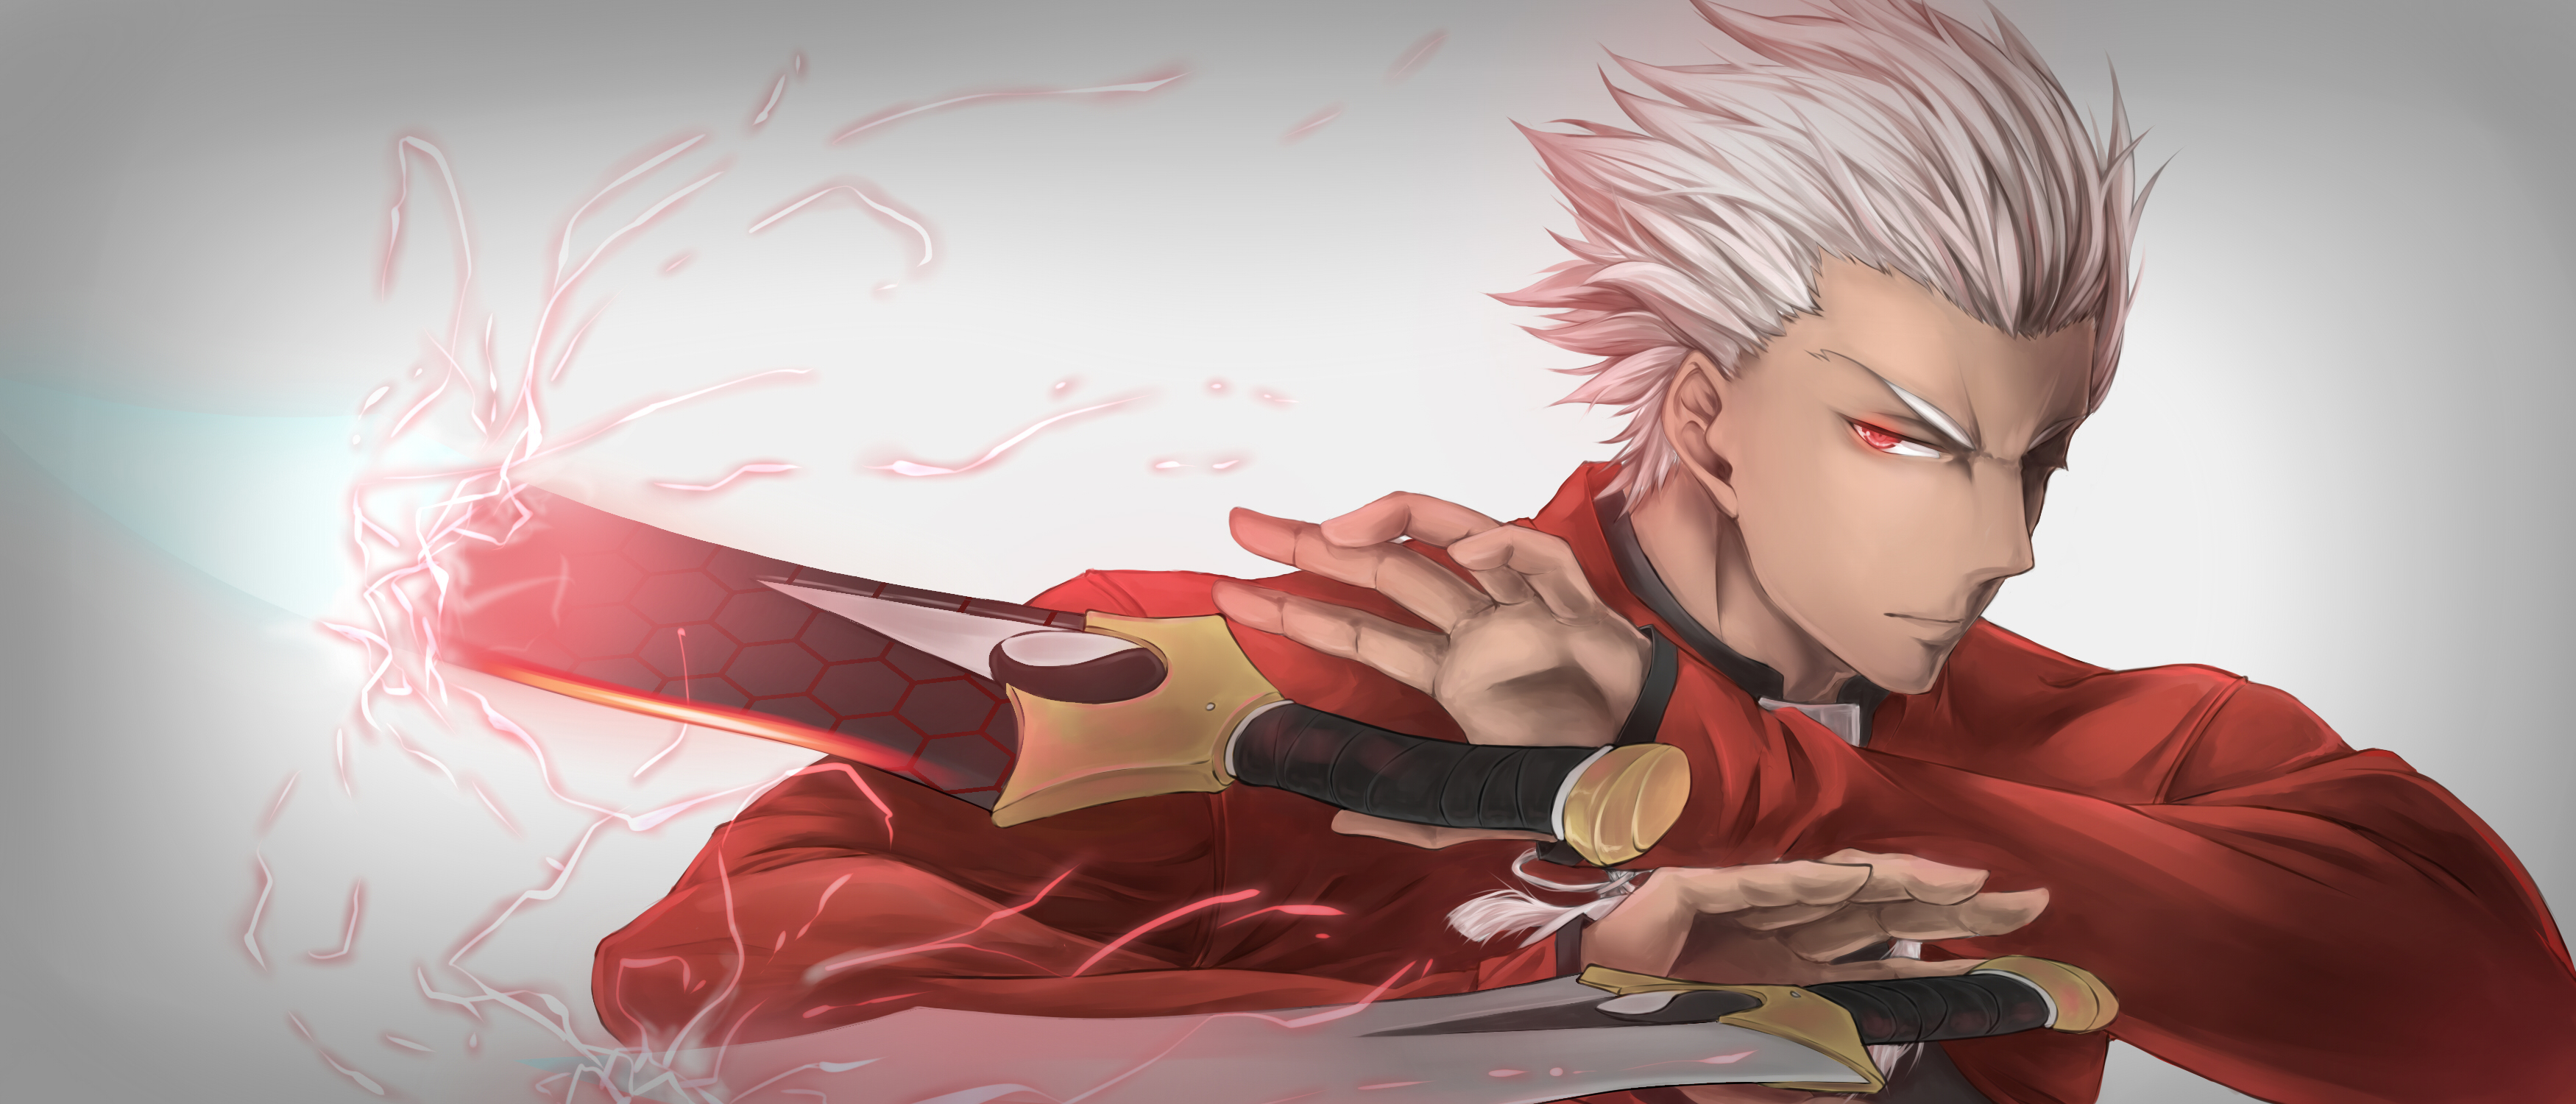 Archer (Fate/Stay Night) HD Wallpaper | Background Image | 3500x1500